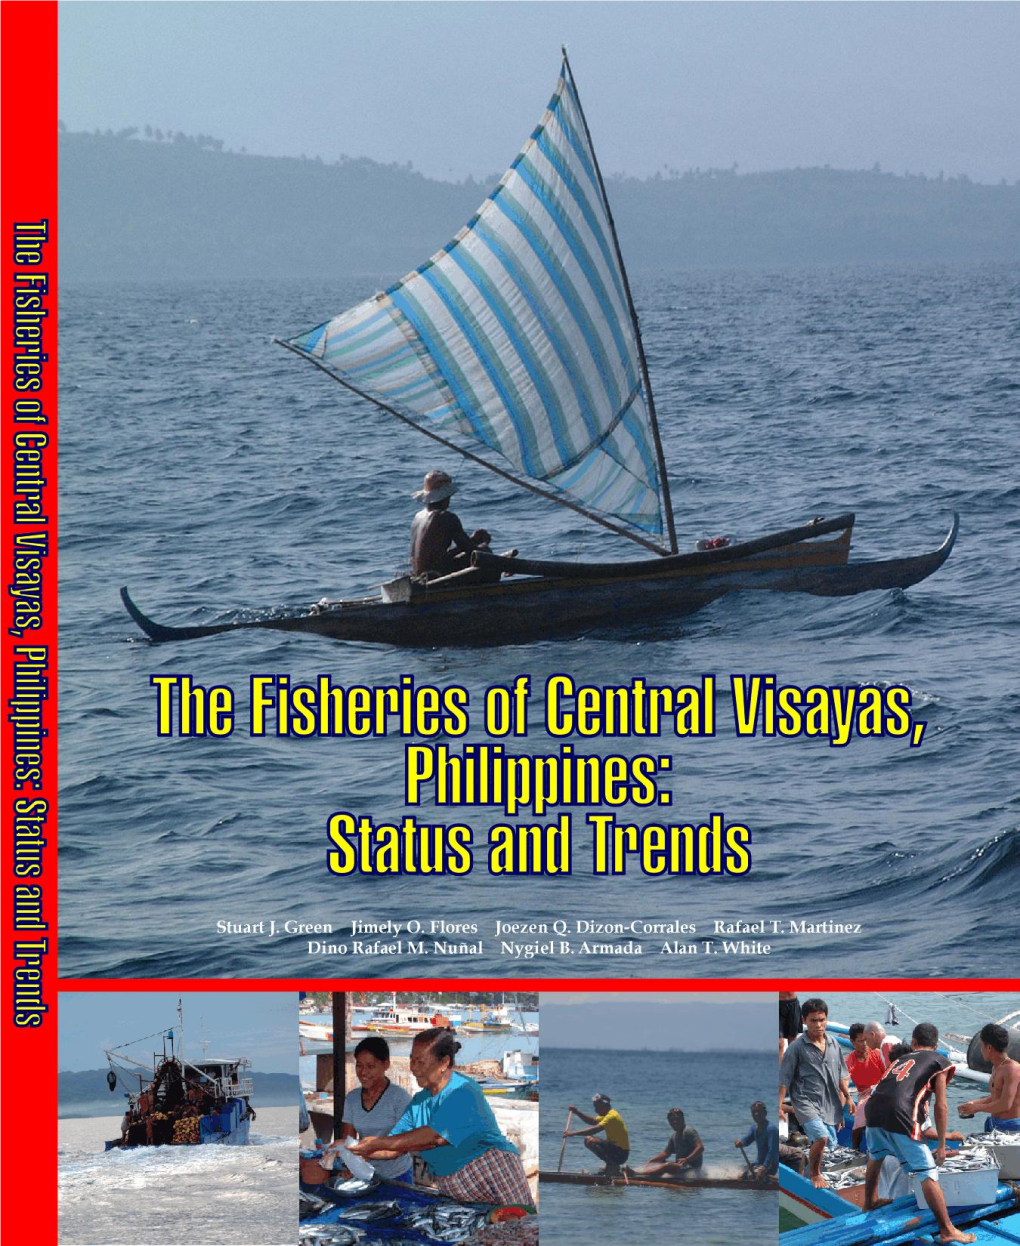 The Fisheries of Central Visayas, Philippines: Status and Trends